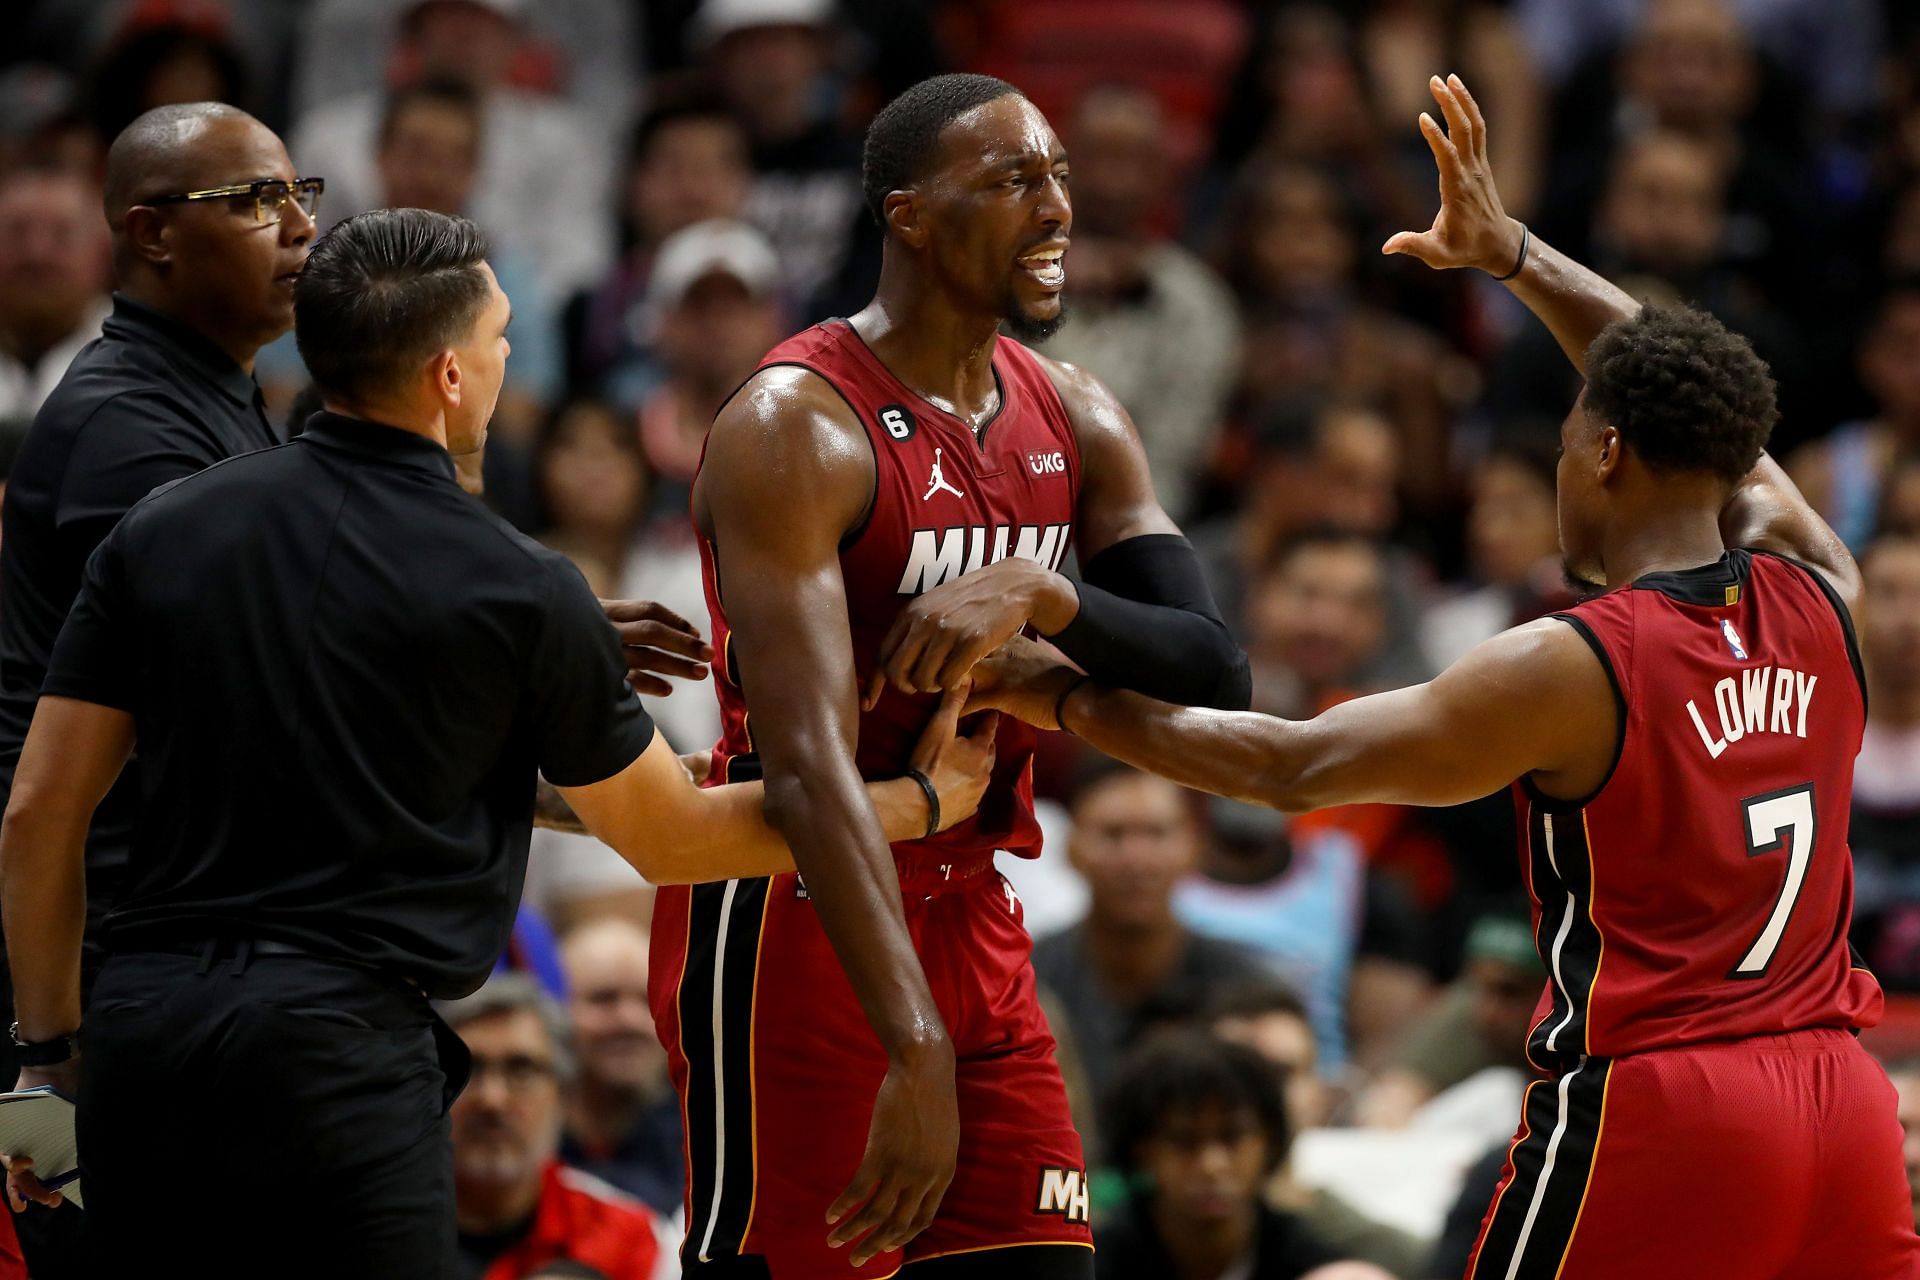 Miami Heat players react to a foul call